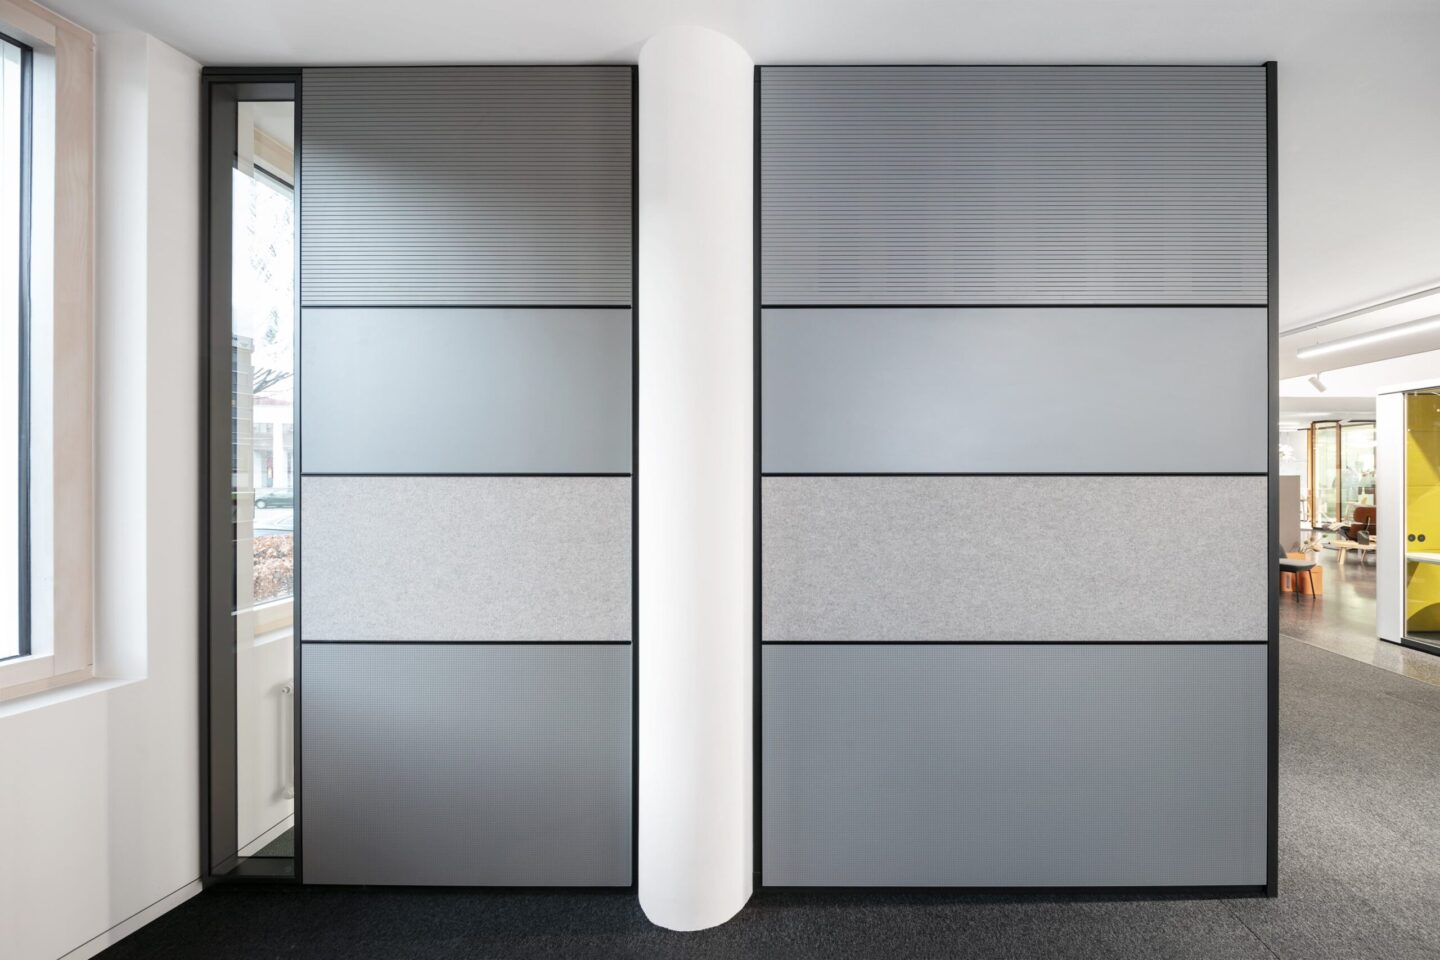 feco-feederle│partition wall systems│solid wall